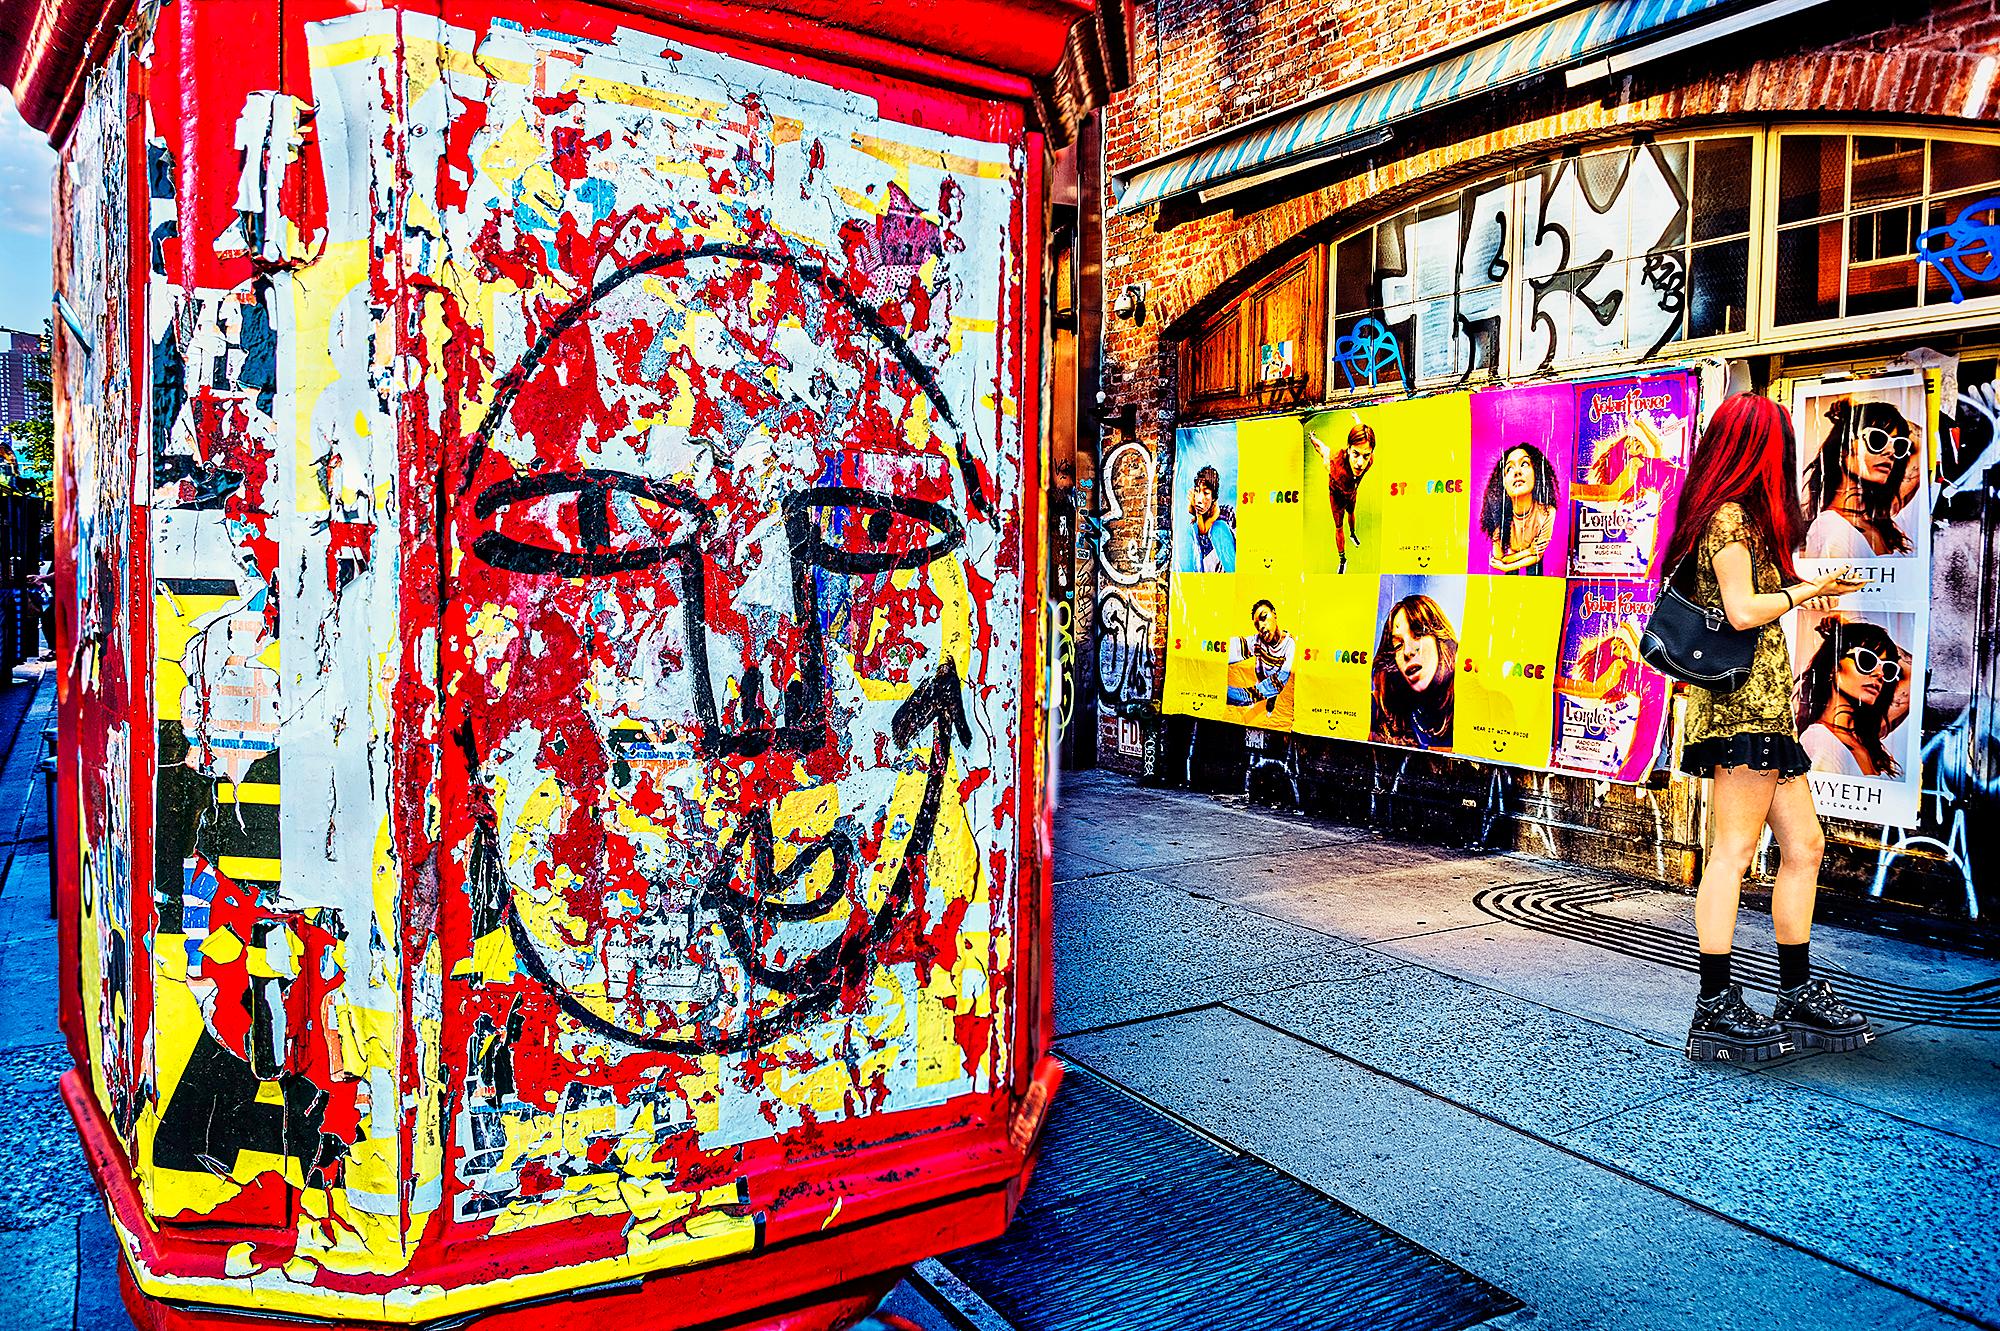 Mitchell Funk Landscape Photograph - Red Head Girl in the Bowery - Graffiti Street Photography 